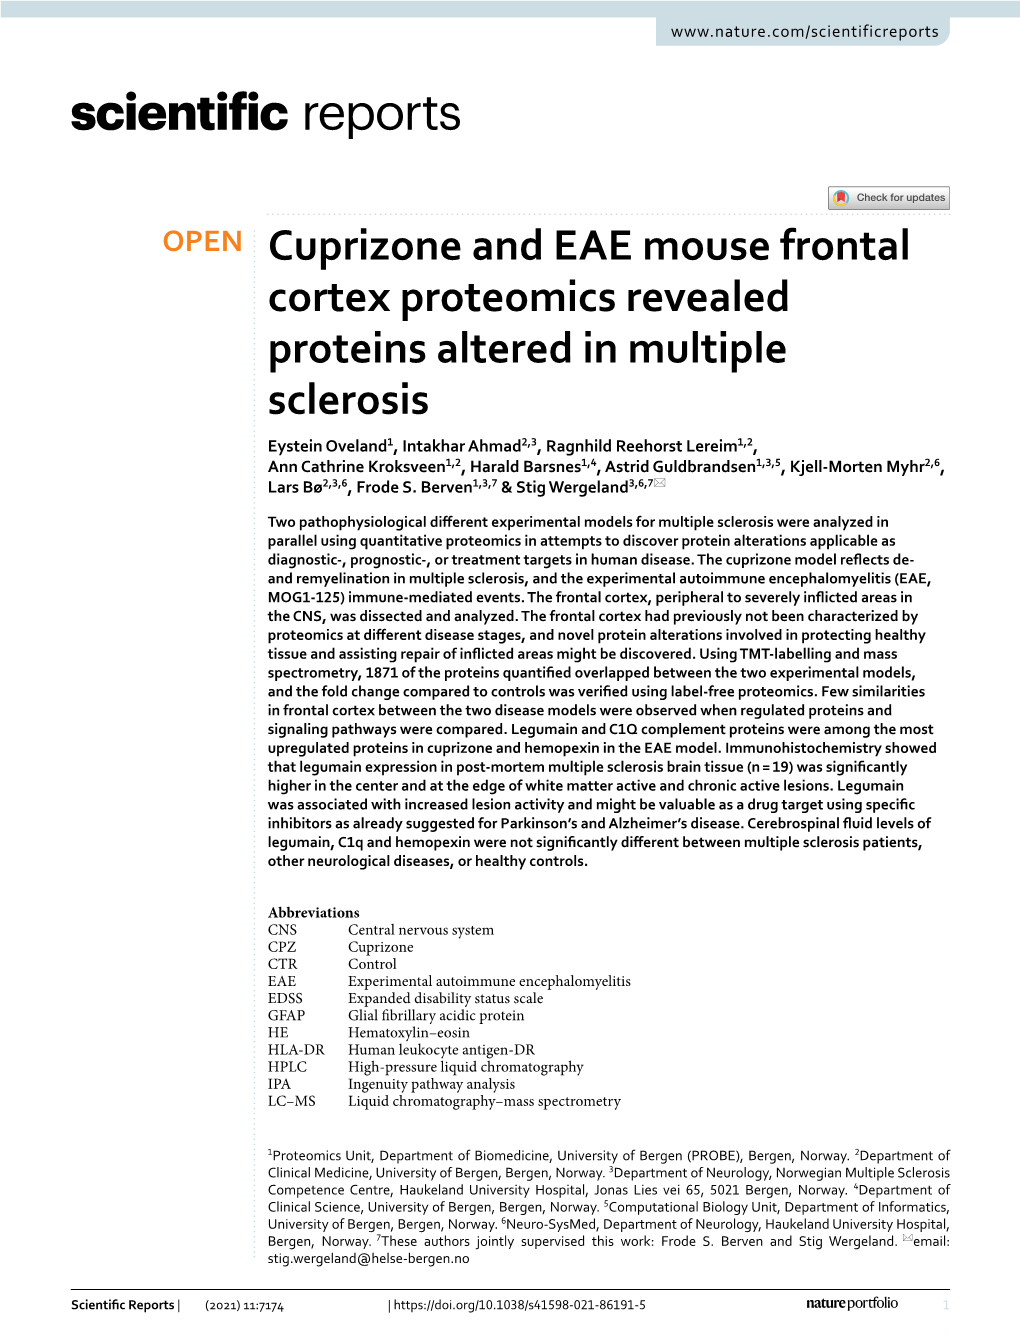 Cuprizone and EAE Mouse Frontal Cortex Proteomics Revealed Proteins